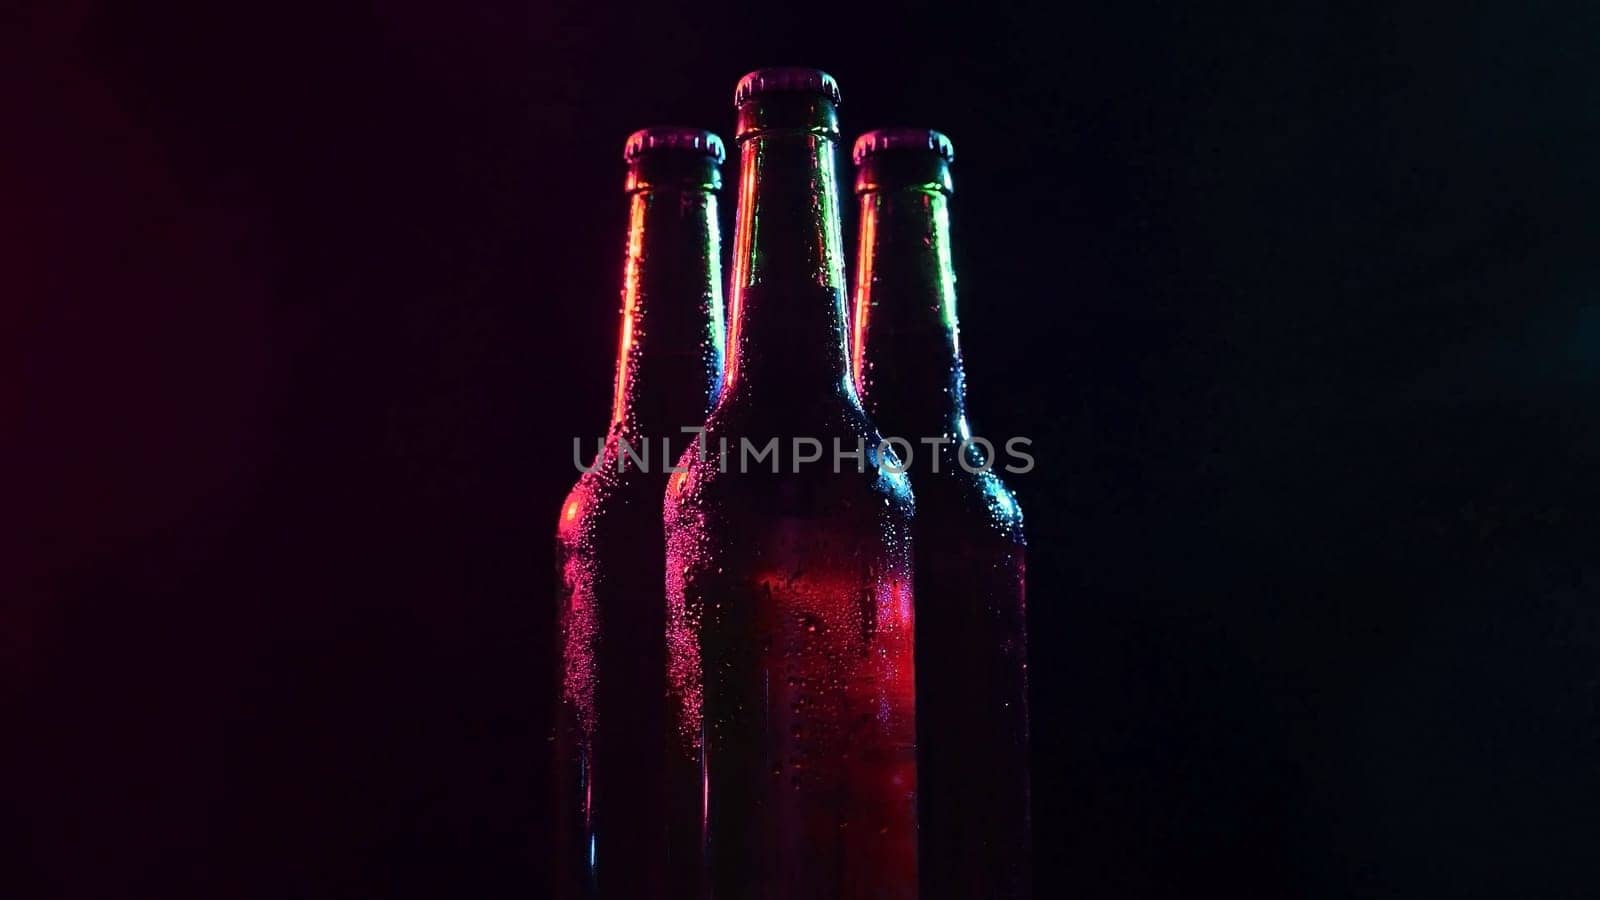 Three bottles of beer spinning in colored light on a black background